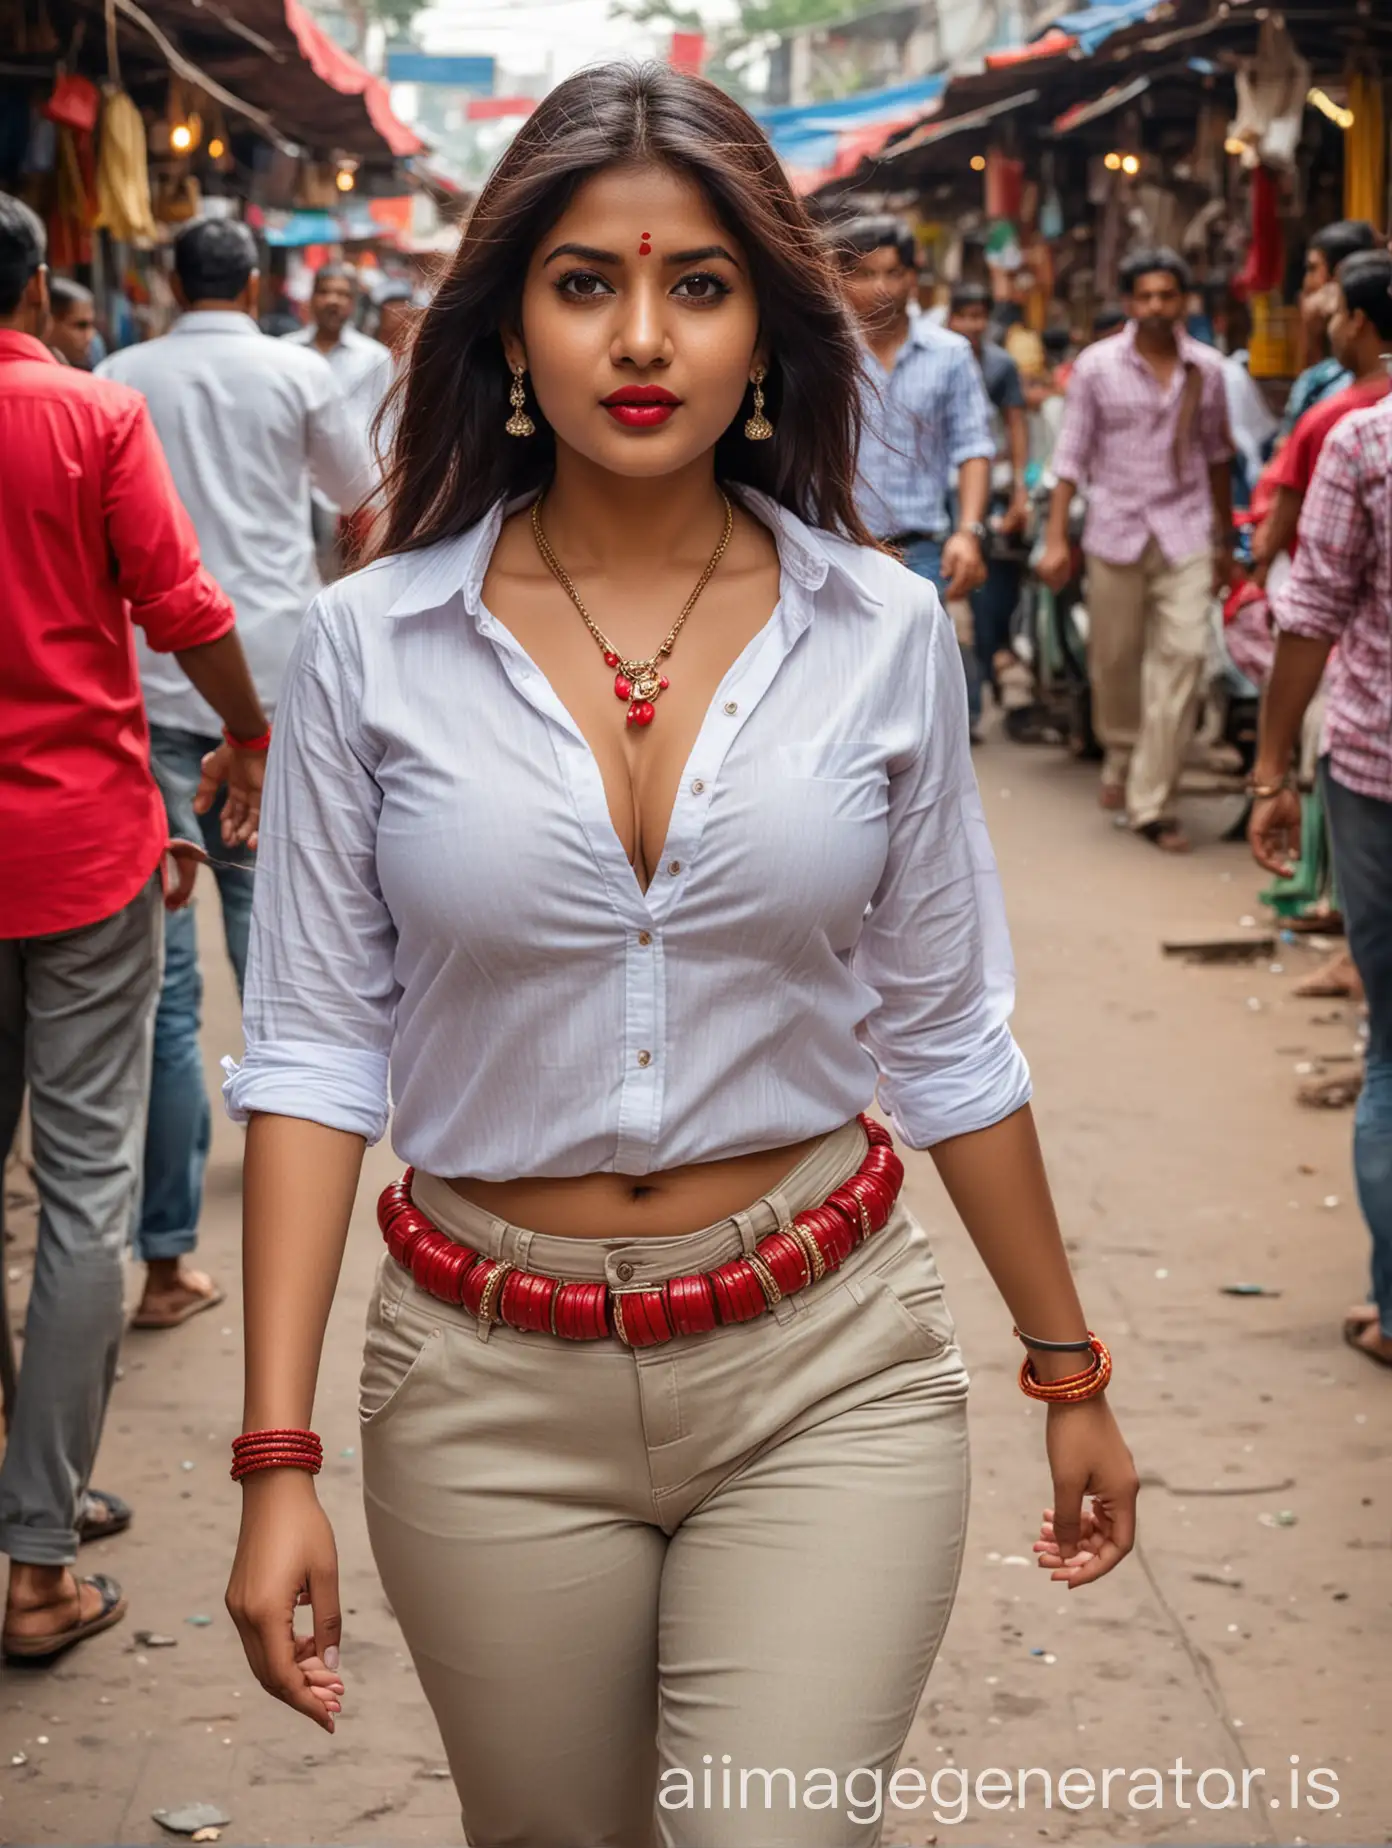 Indian busty lady red lipstick wearing shirt red bangles showing cleavage walking in the market candid shot full portrait